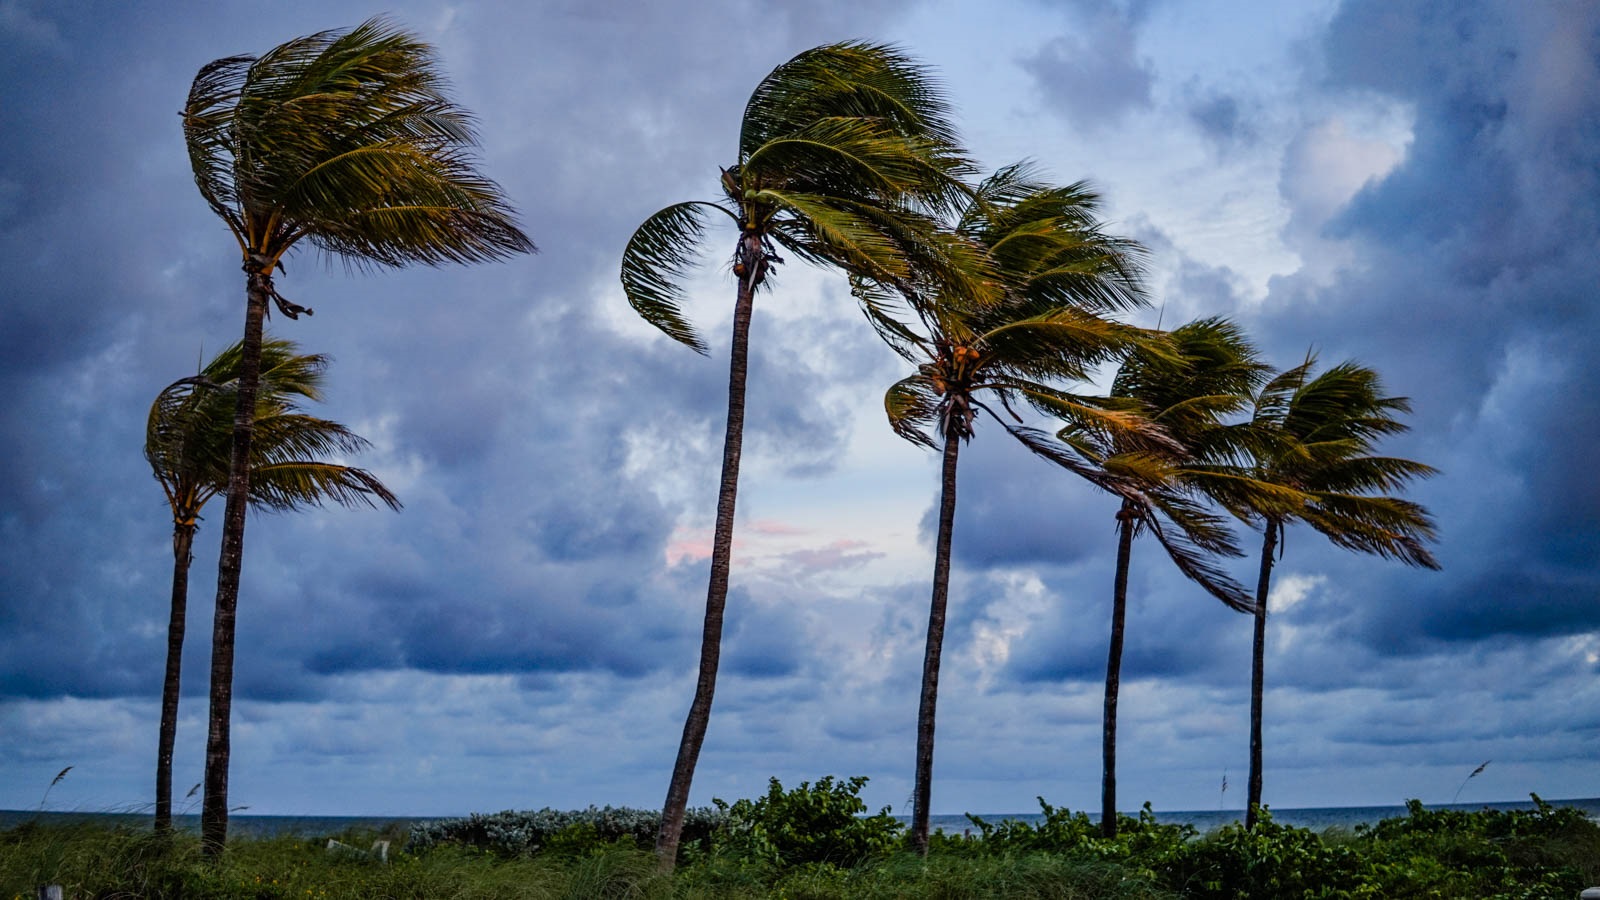 Palm trees blowing in the wind against stormy sky. (Image by Shutterstock/Leonard the Food Guy.)